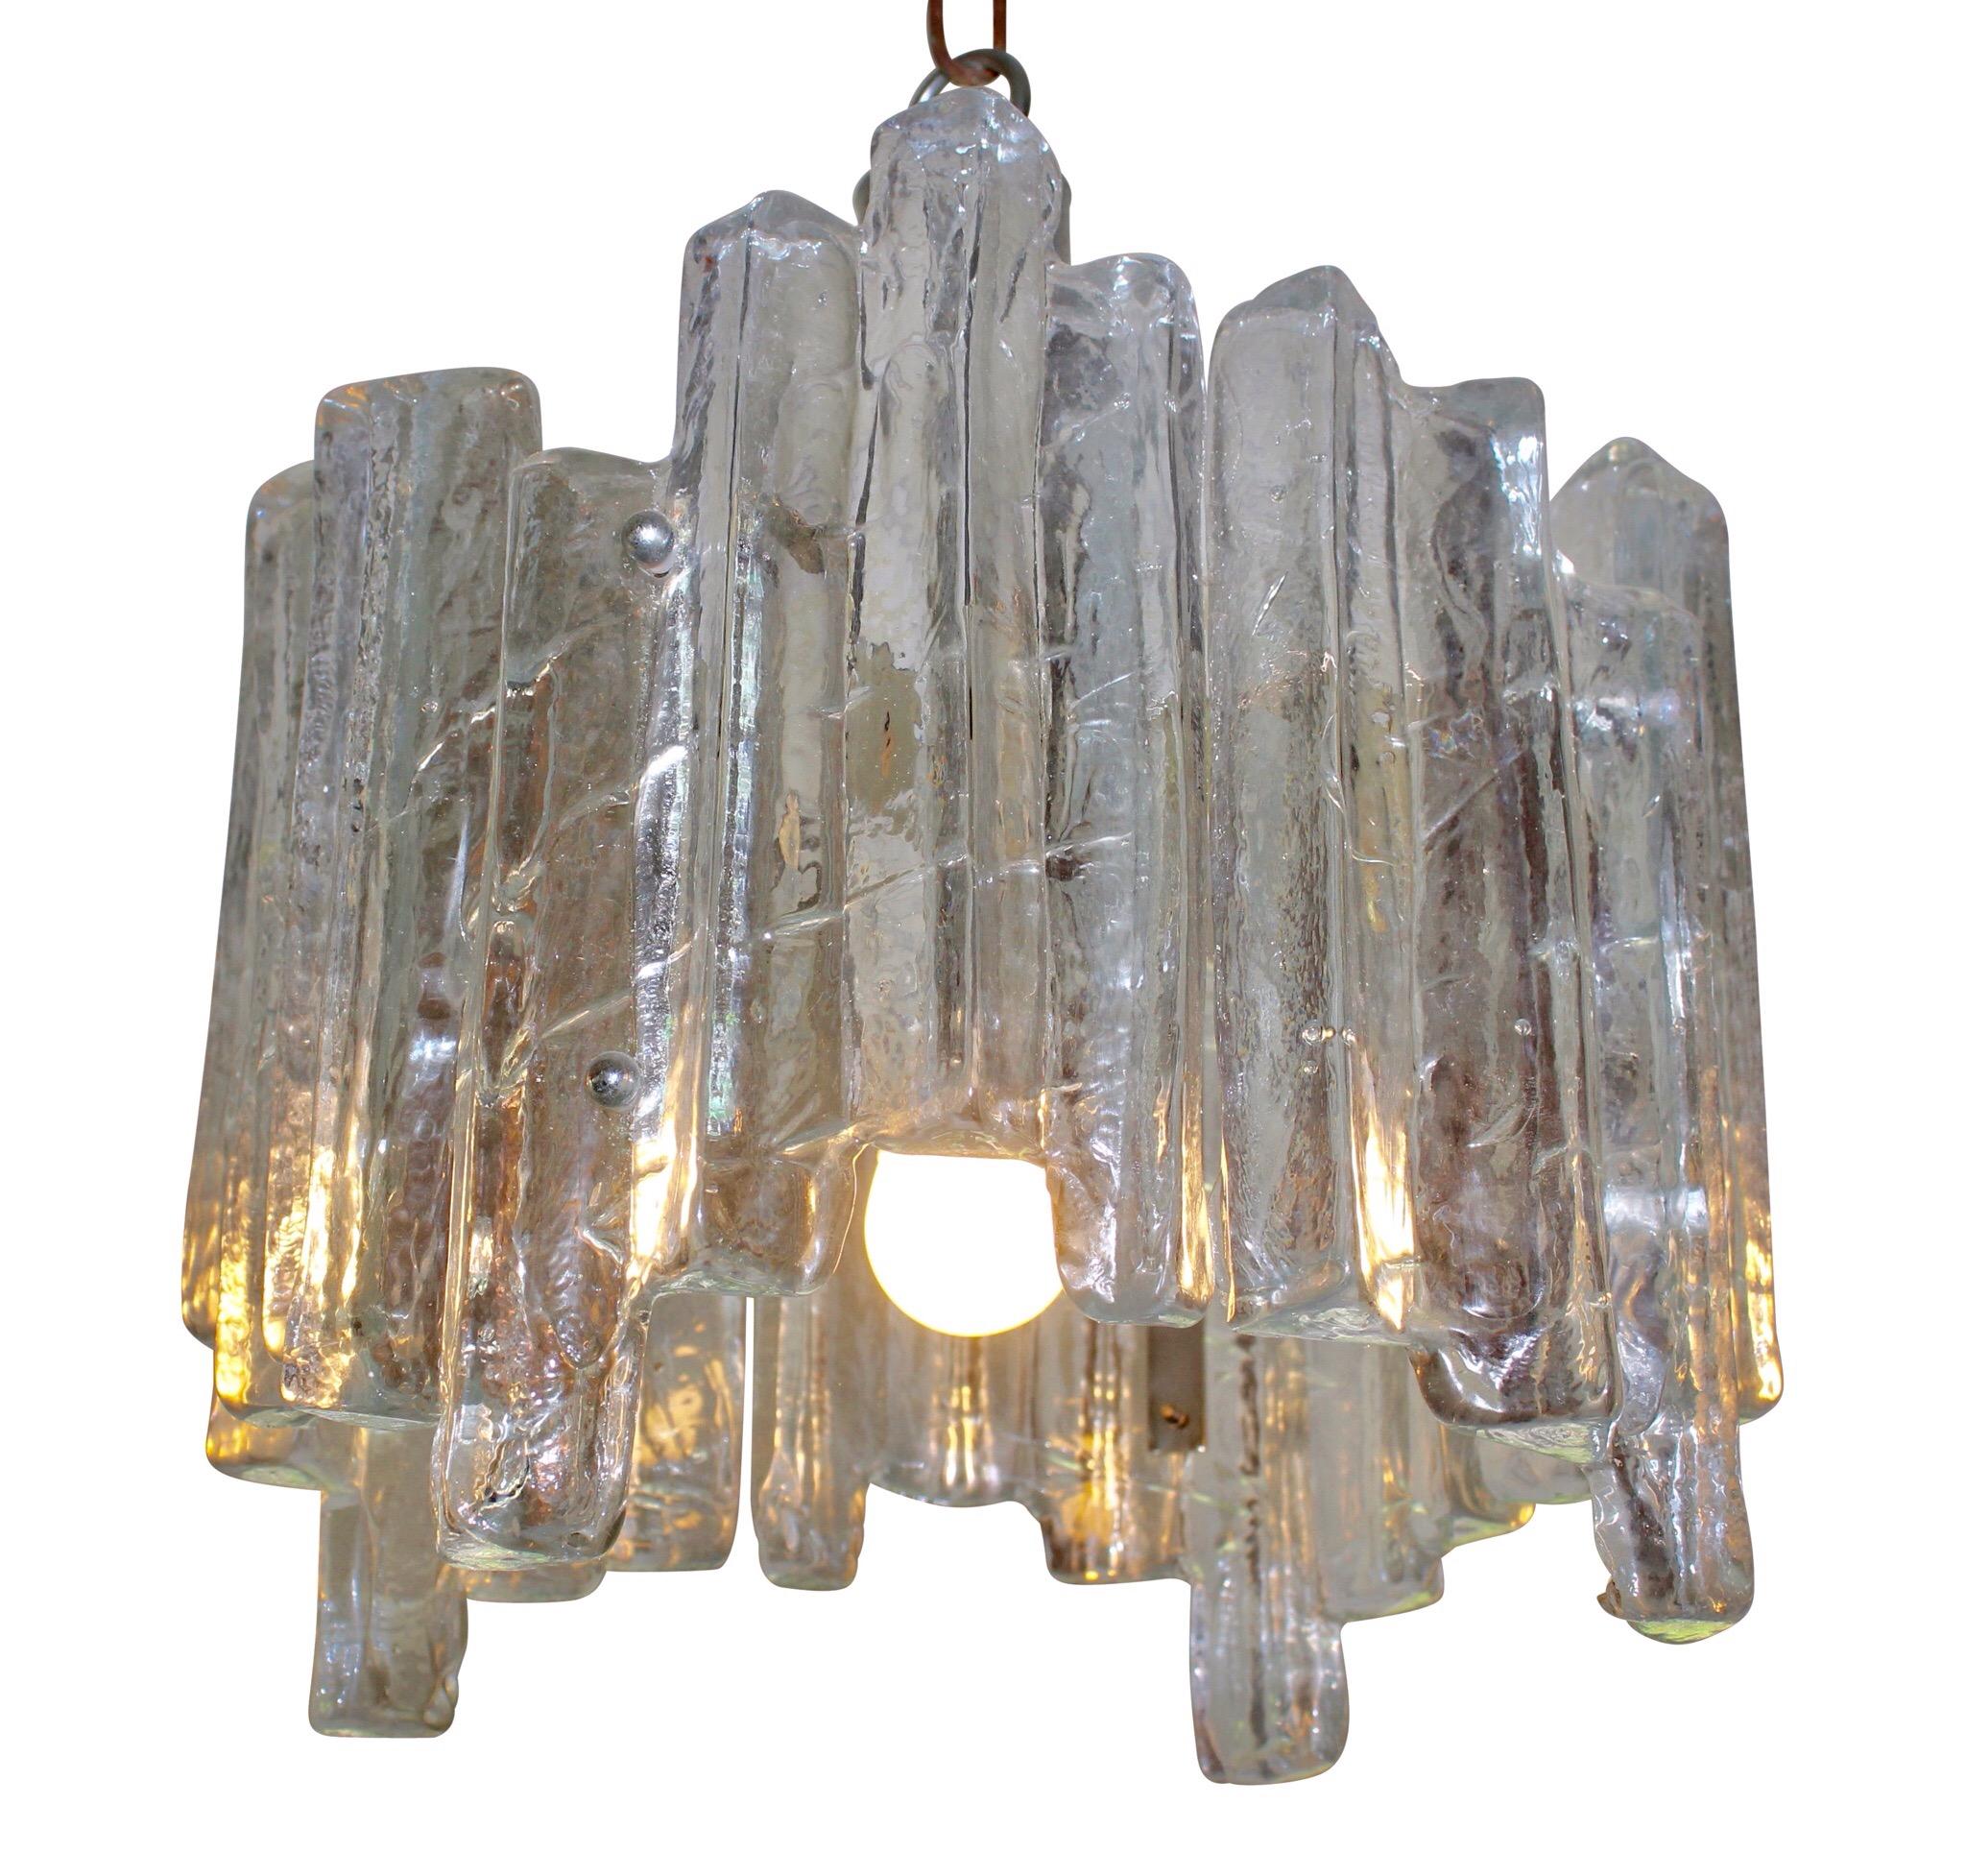 Large chandelier and heavy chrome construction E27 sockets crystal ice glass elements form the 1960s.
And 2 wall mount lamps E14 sockets crystal ice glass elements.
This is a perfectly matching pair.
The difference in color is due to the light